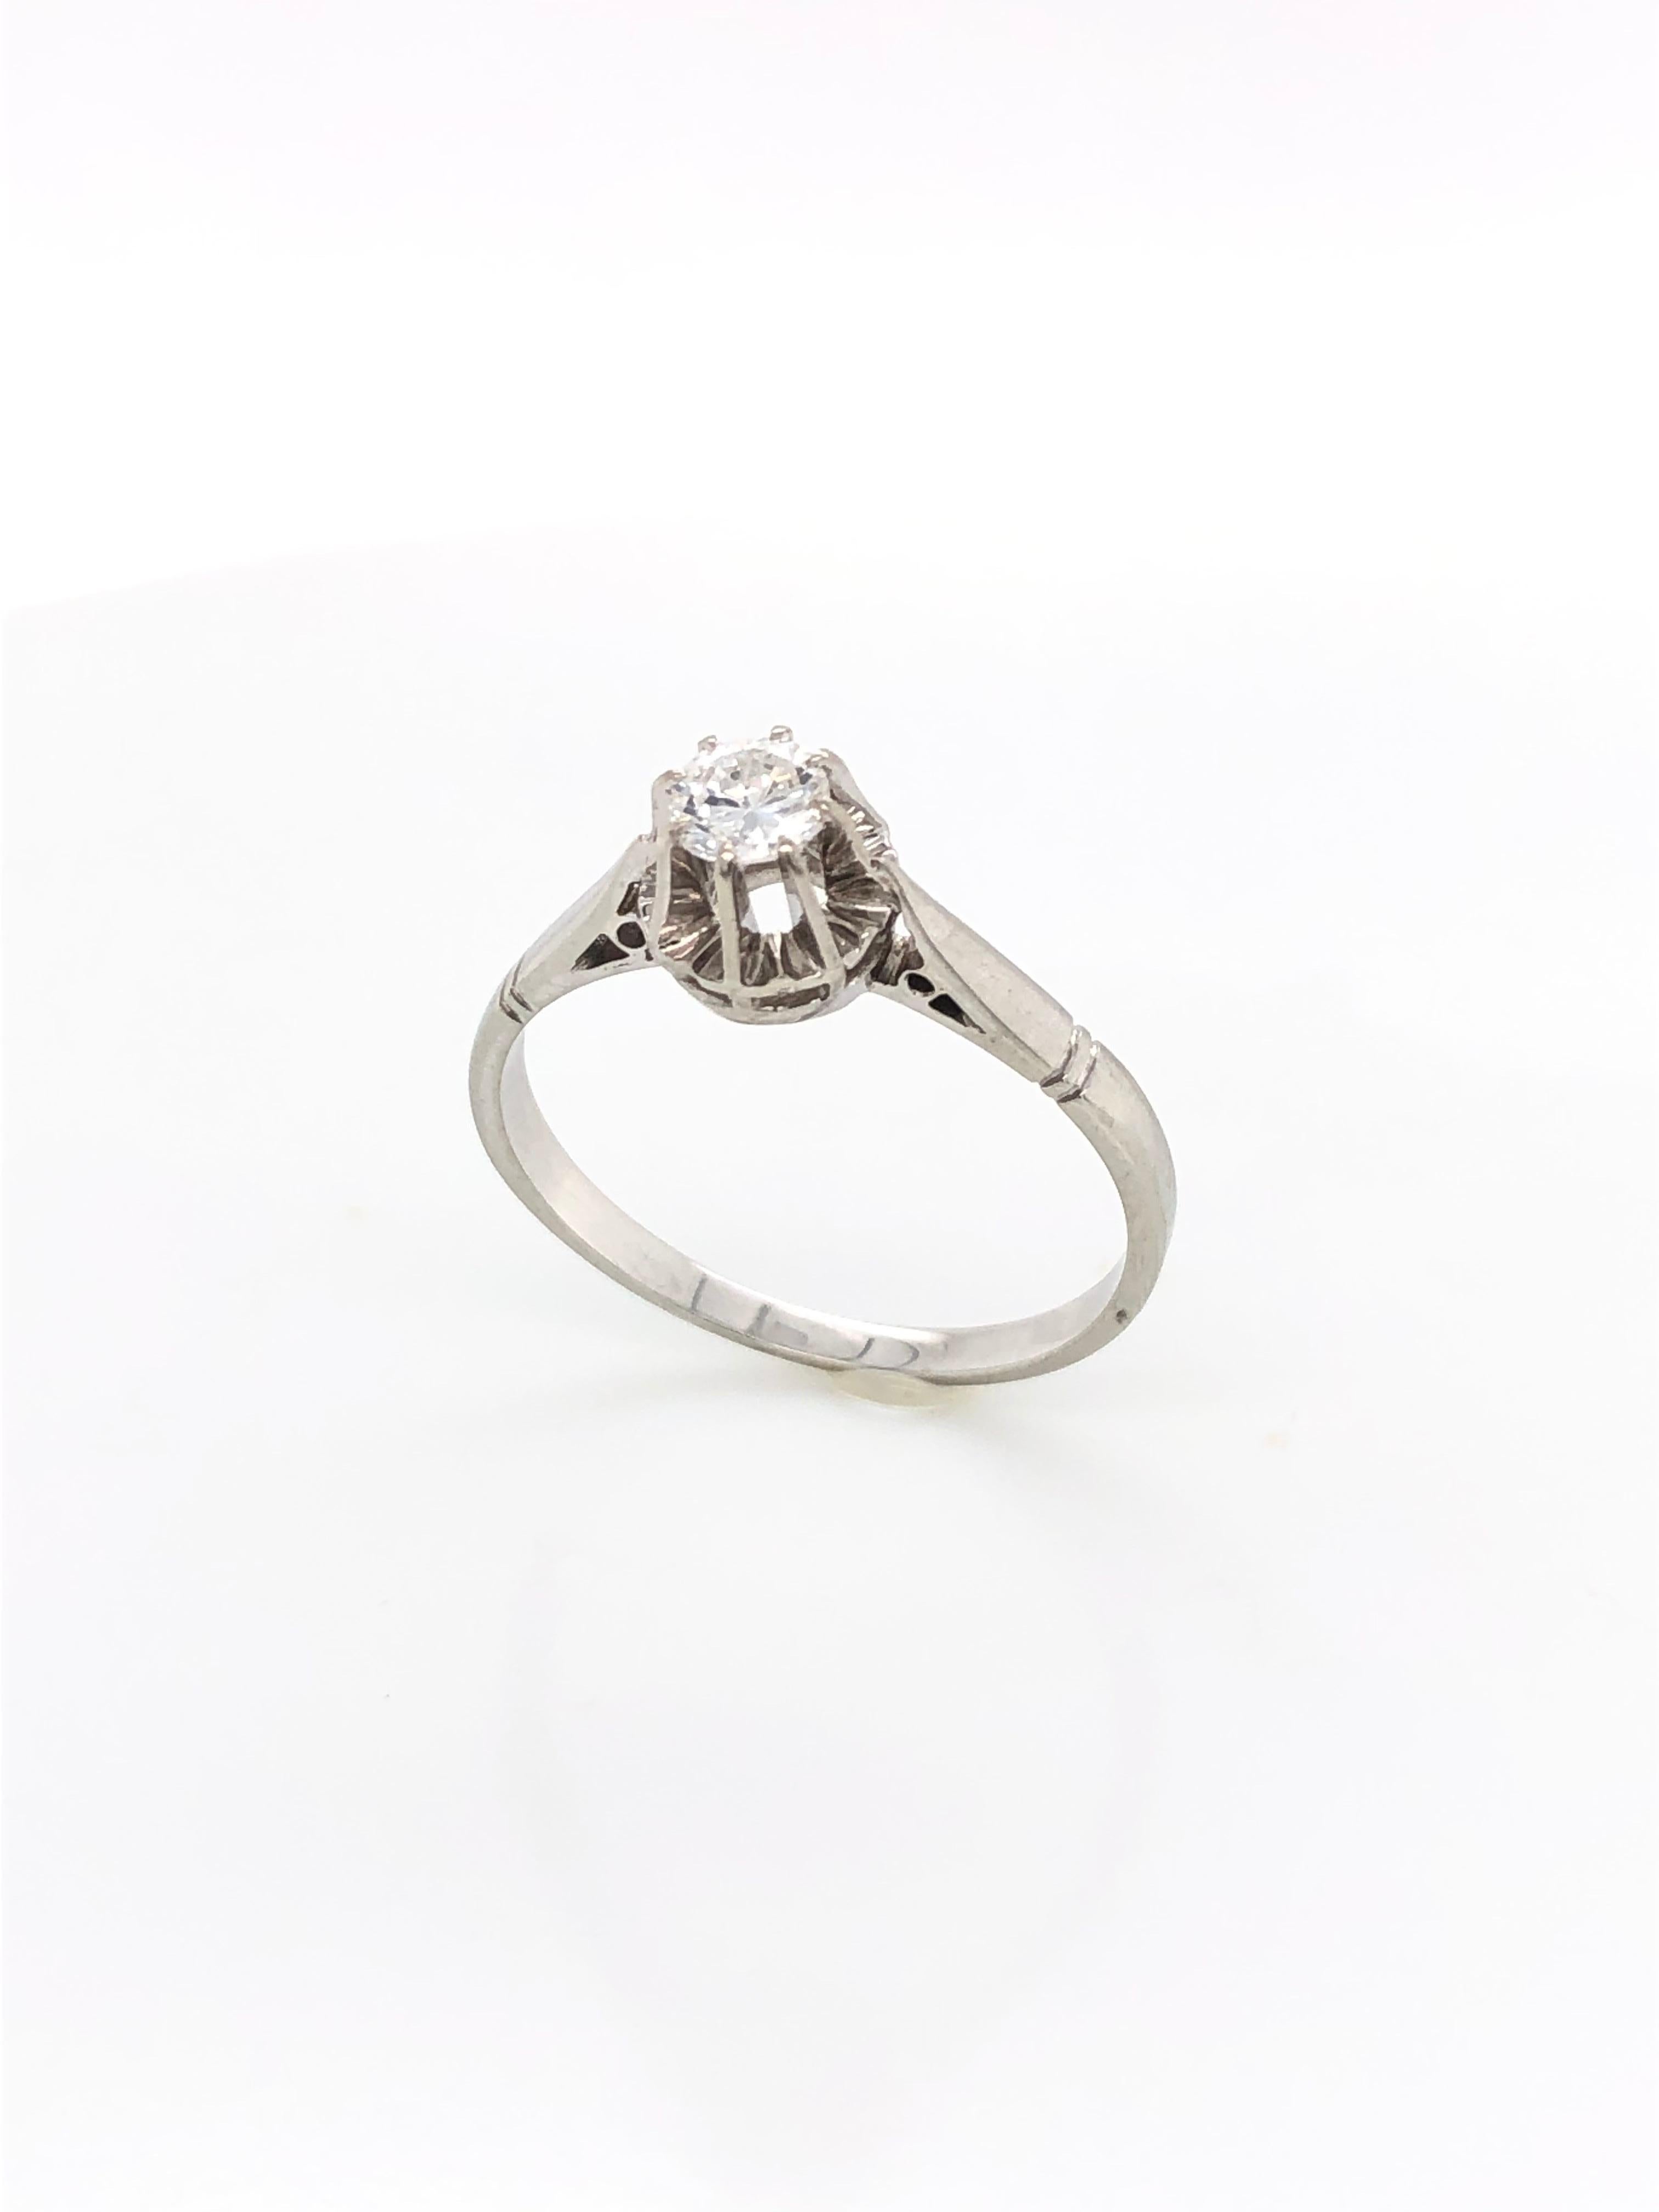 Discover this white gold solitaire, a timelessly elegant piece of jewelry designed to set off a magnificent white diamond. This solitaire has been meticulously mounted to capture and reflect light optimally, magnifying the diamond's natural